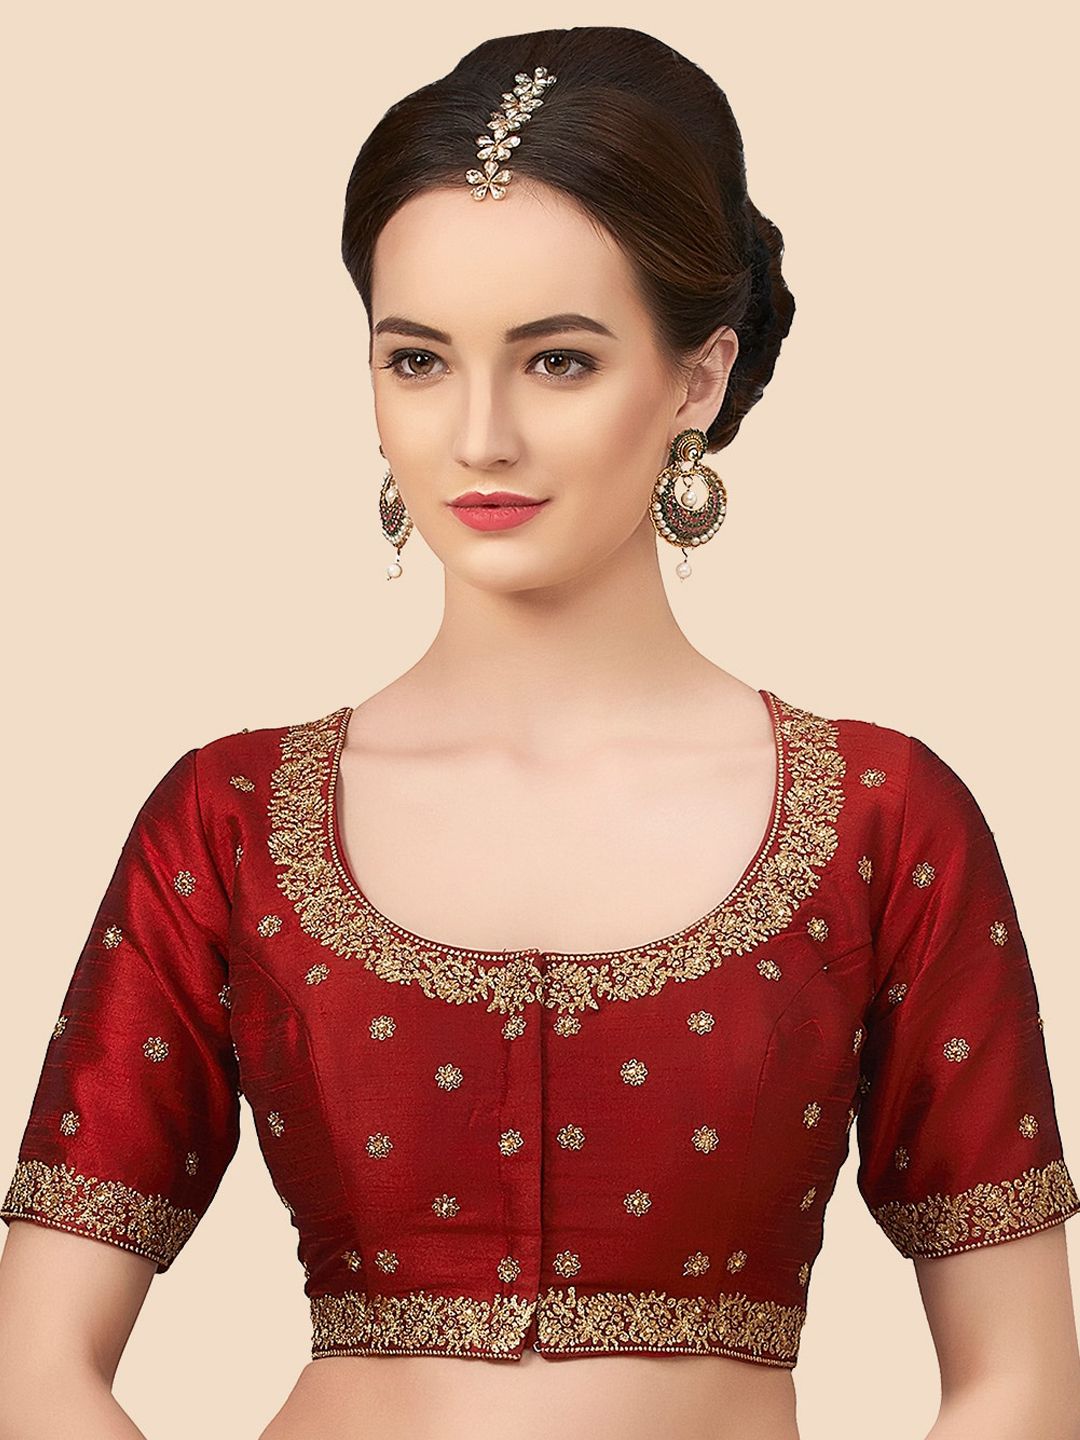 neckbook Women Maroon Embroidered Princess Cut Saree Blouse Price in India